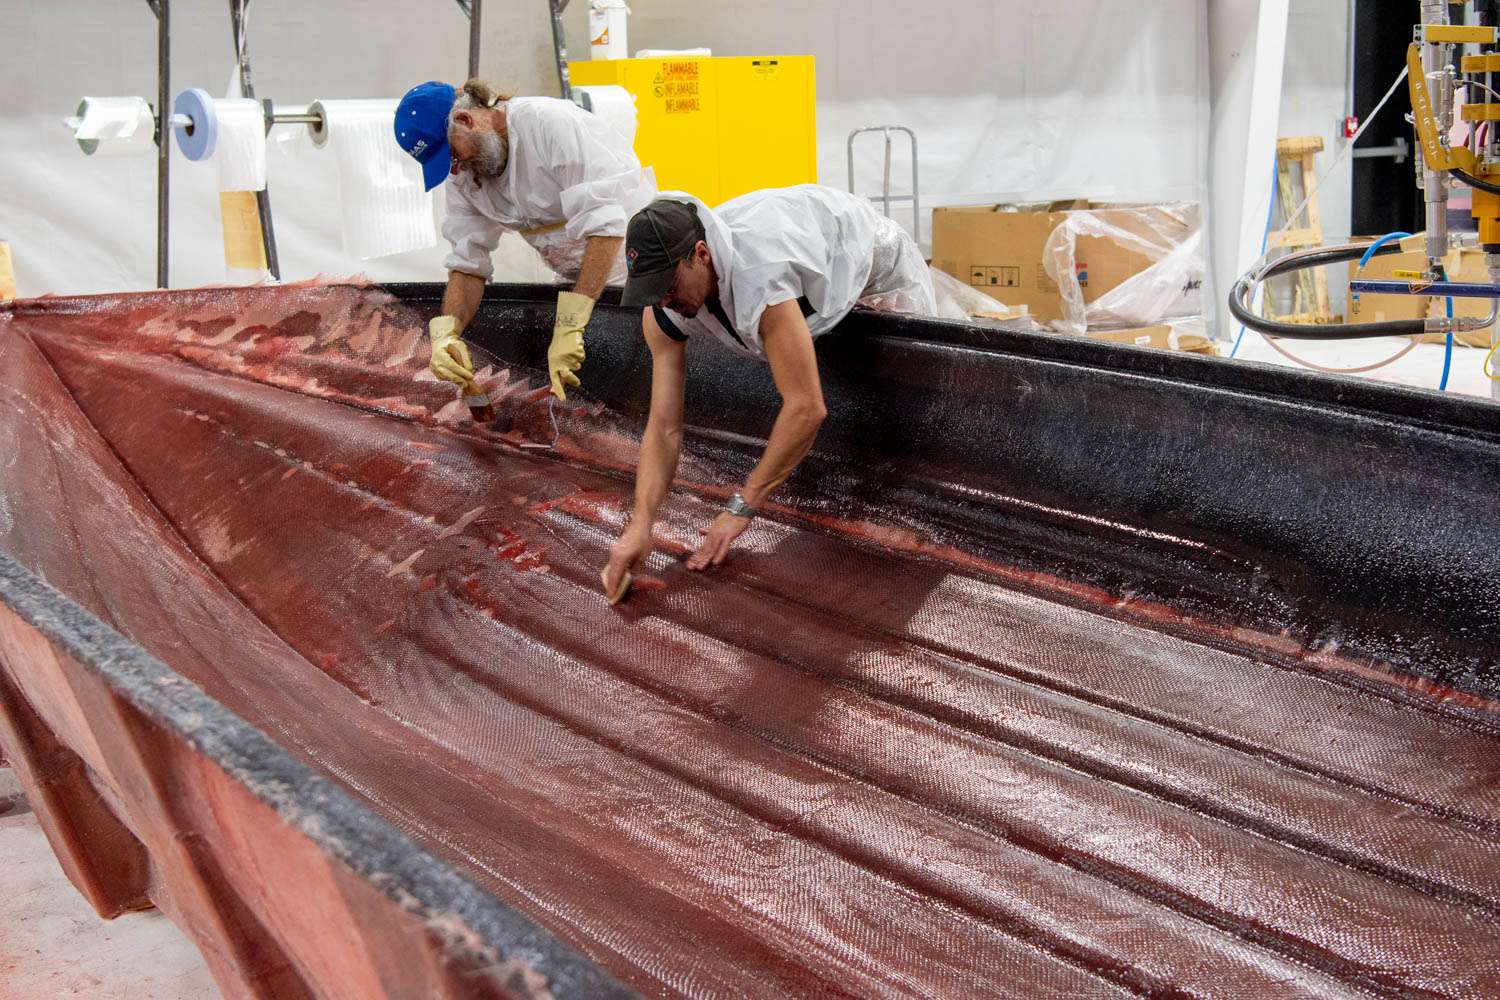 The CX 21 hull is hand-laid by artisans who have worked for Bentz on other boat brands for decades.